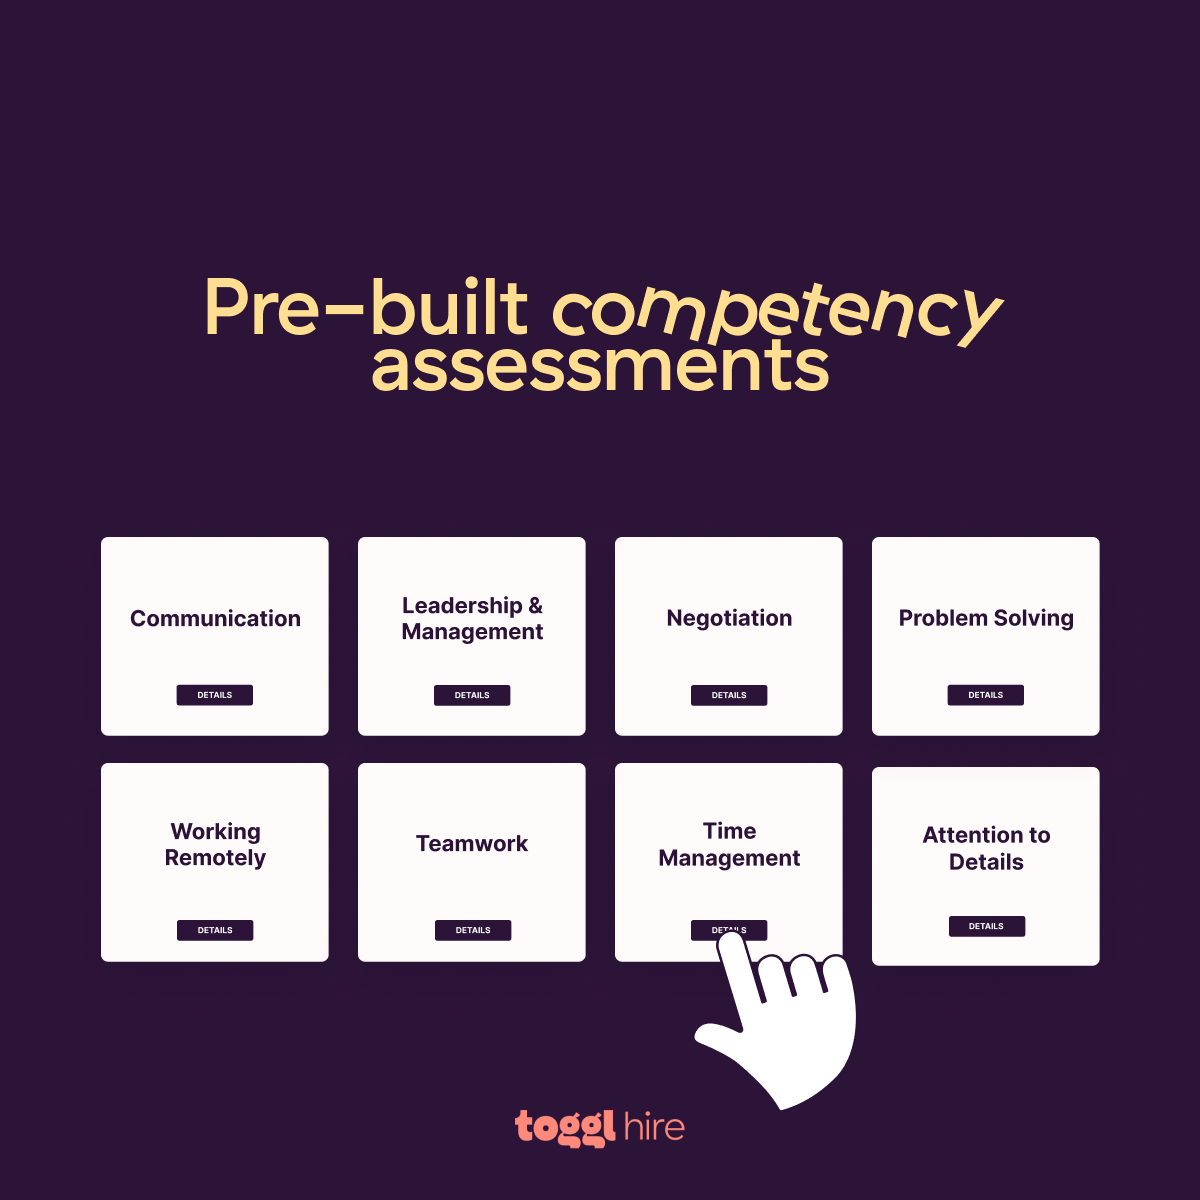 competency-skills-assessments-explained-advantages-challenges-use